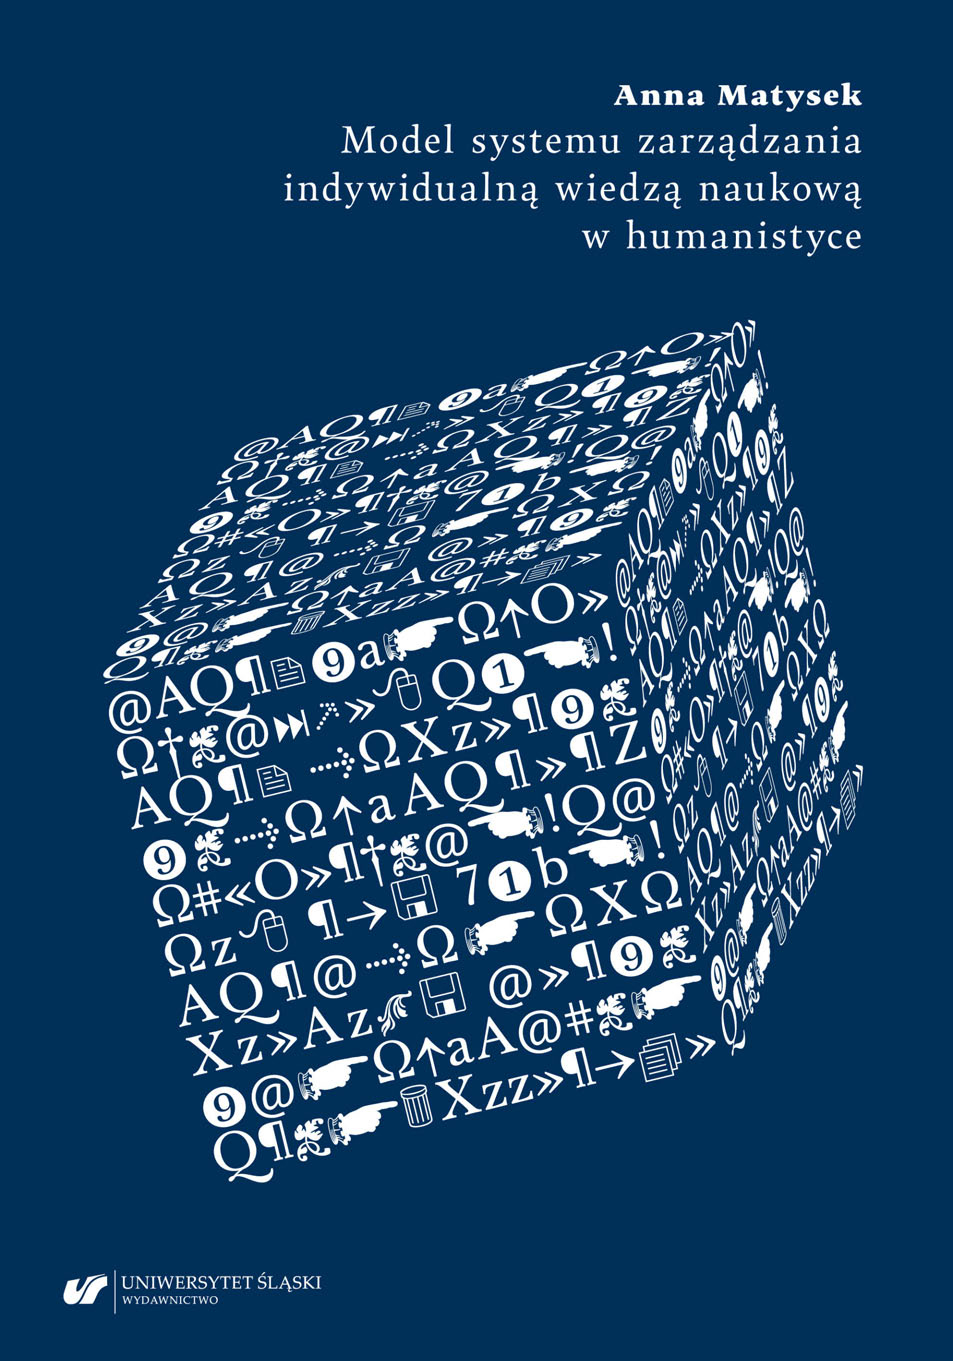 A model for a system for managing individual scientific knowledge in the humanities Cover Image